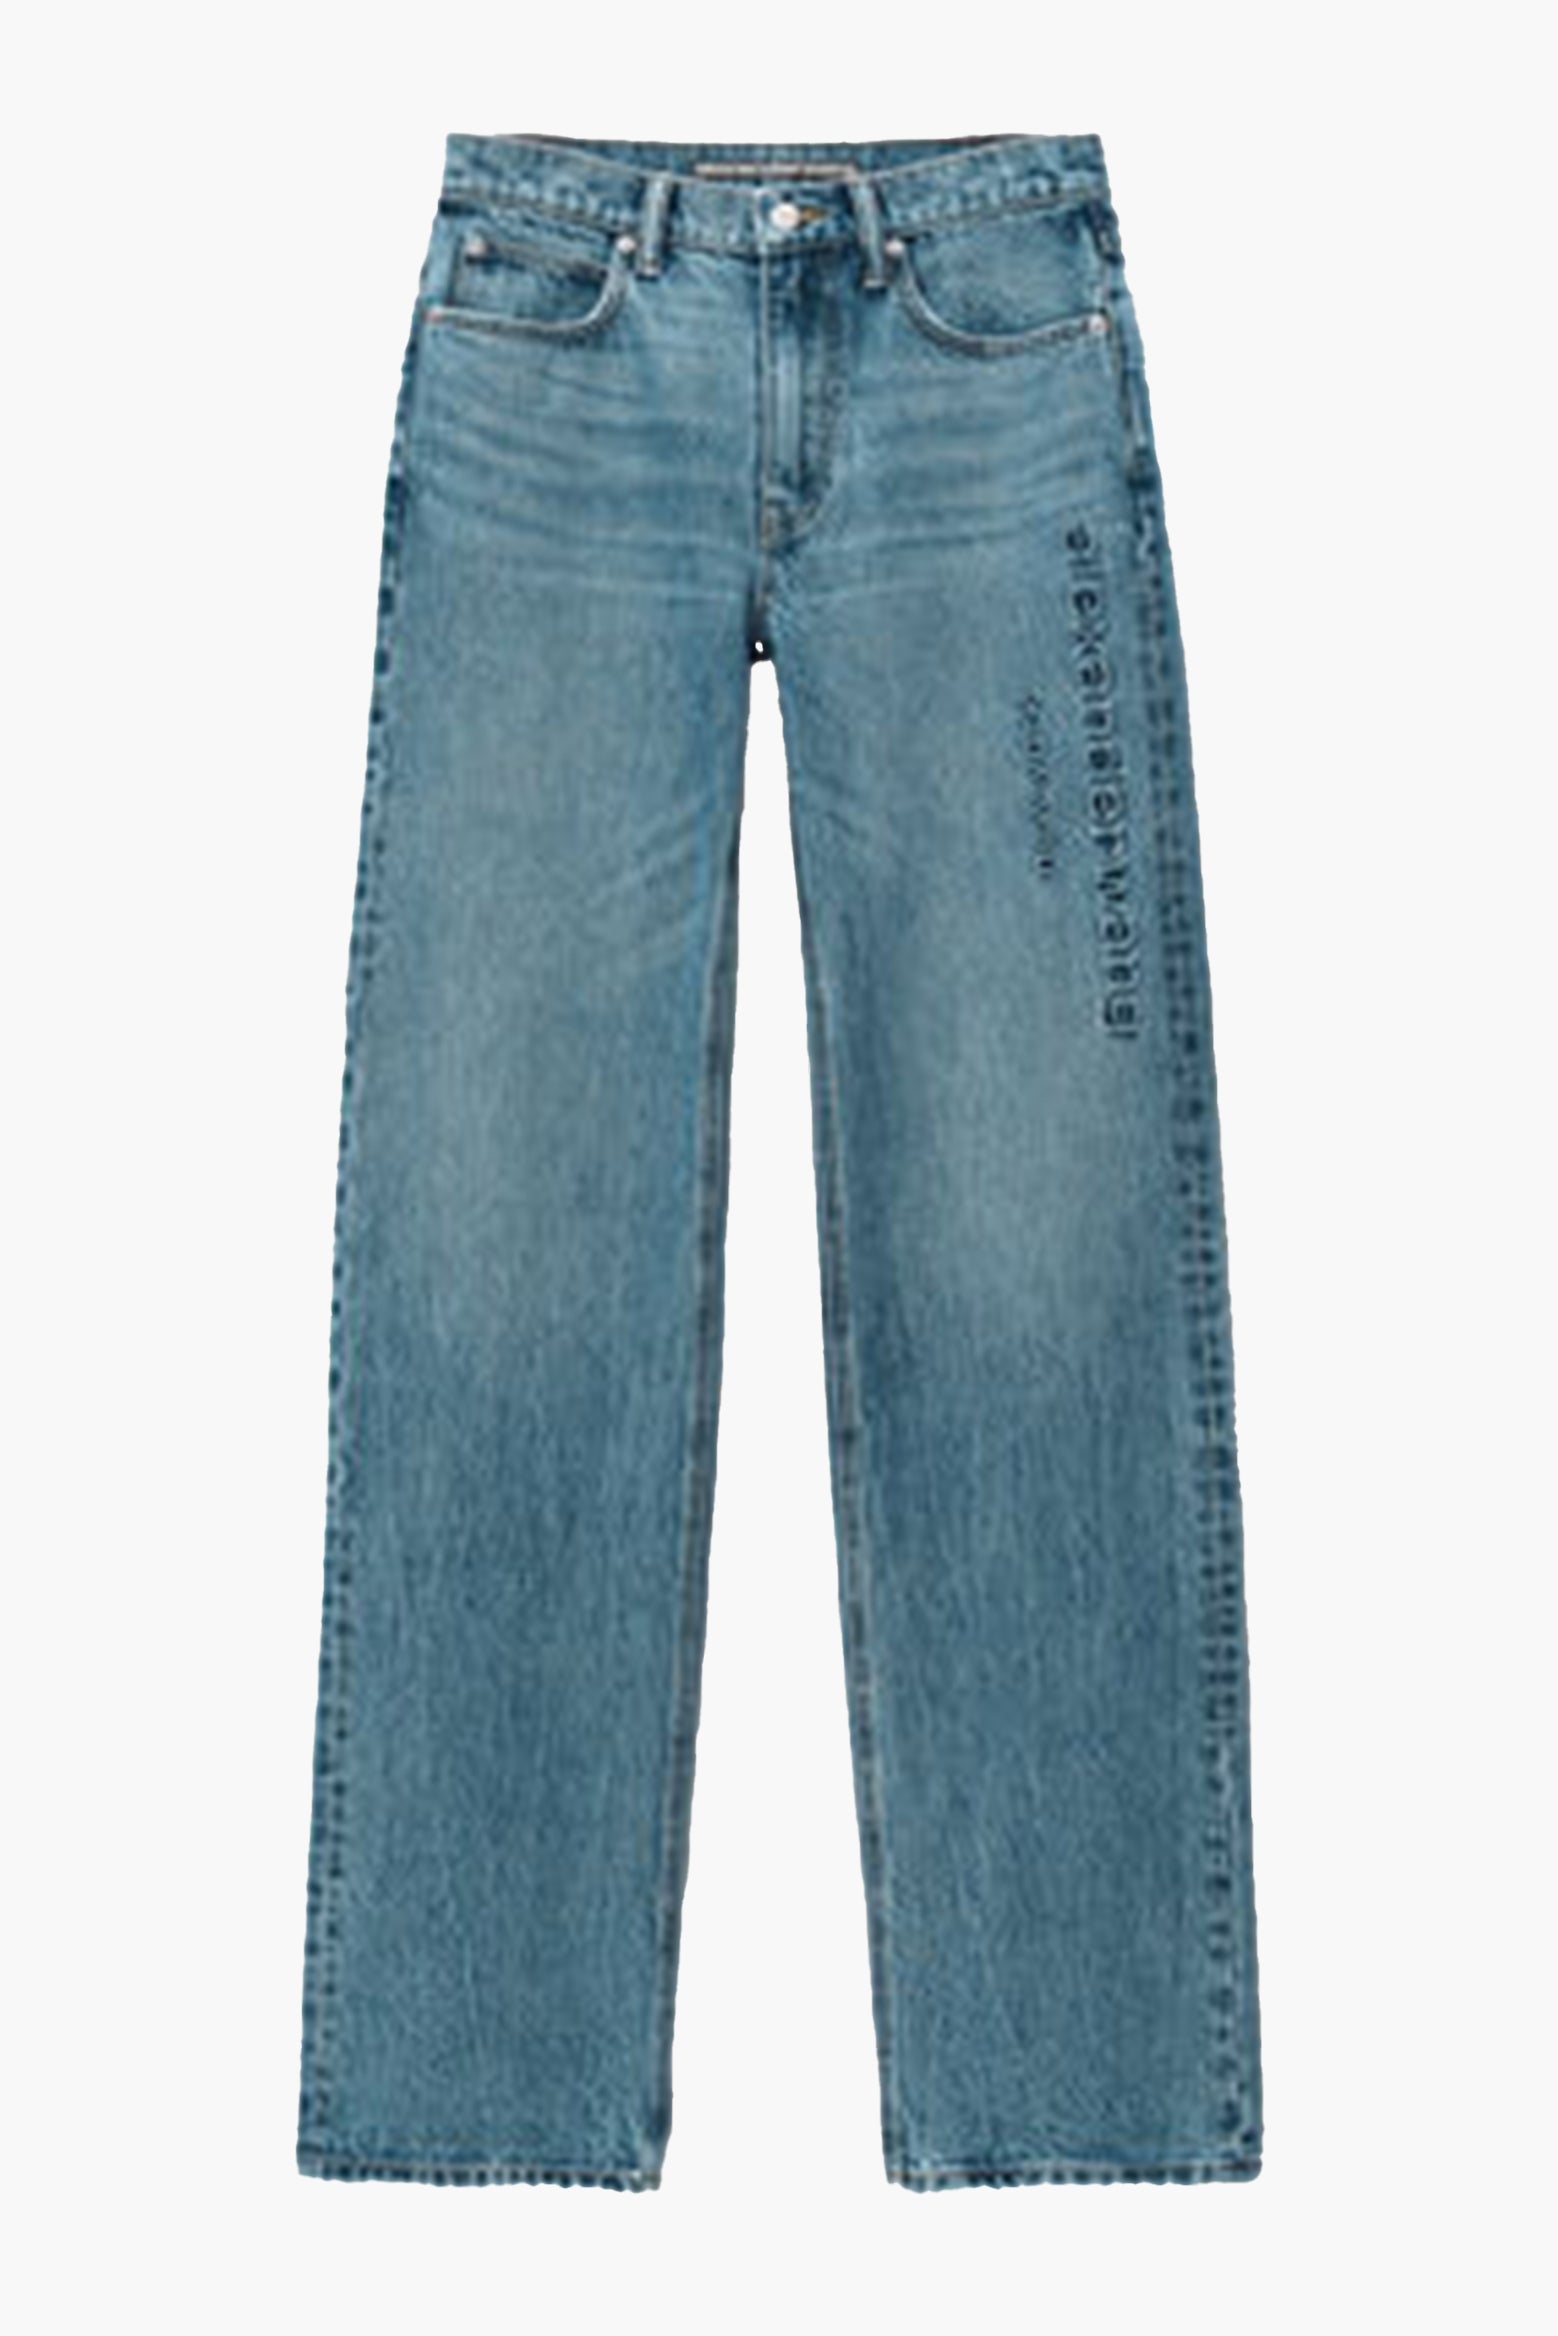 The Alexander Wang EZ Mid Rise Relaxed Straight Logo Emboss Jean in Vintage Light Indigo available at The New Trend. 